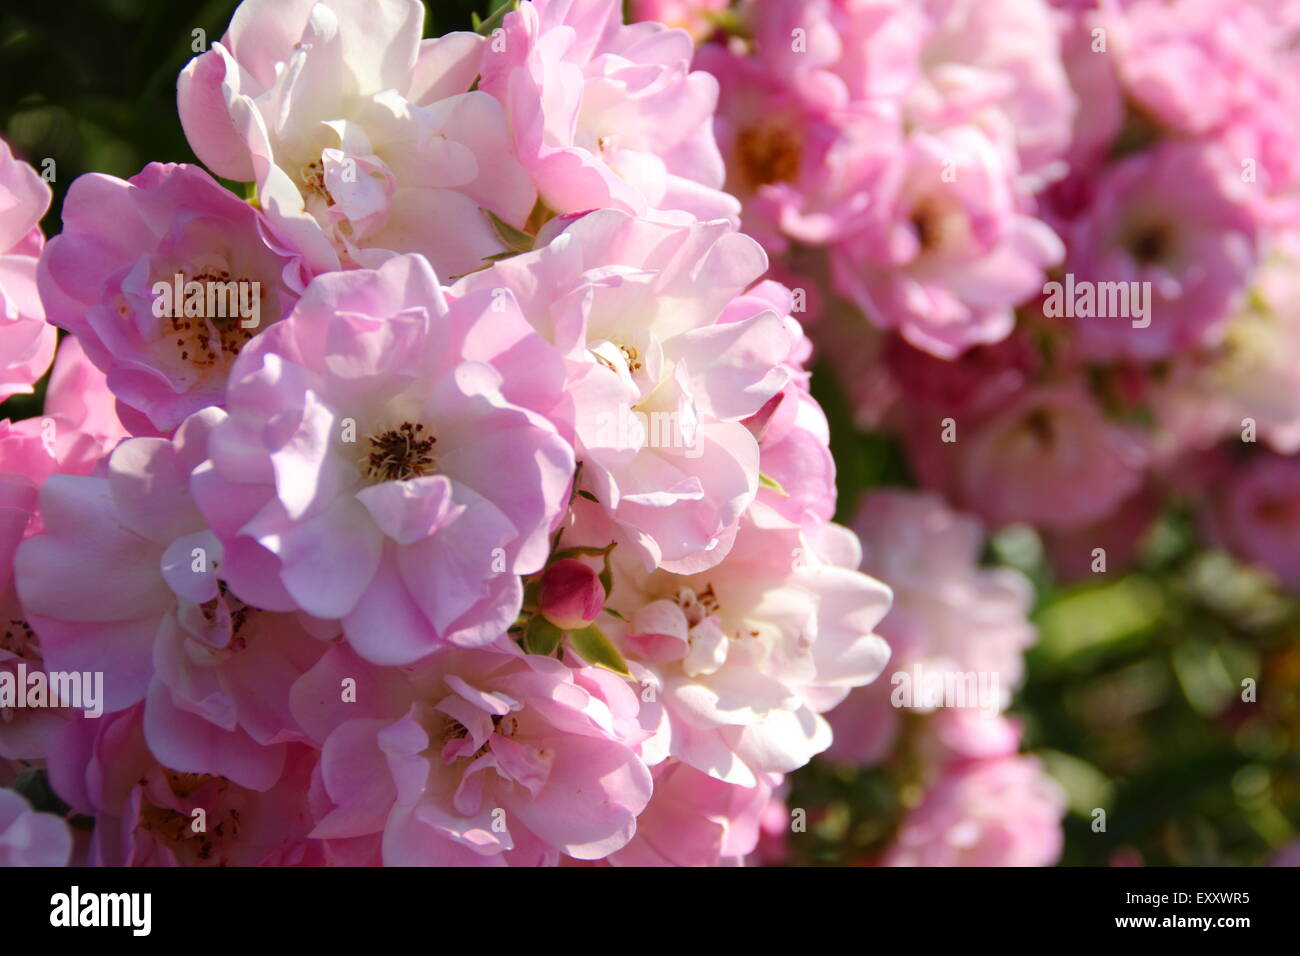 Clusters of pink rambling roses in the Peak District, Derbyshire, England UK Stock Photo